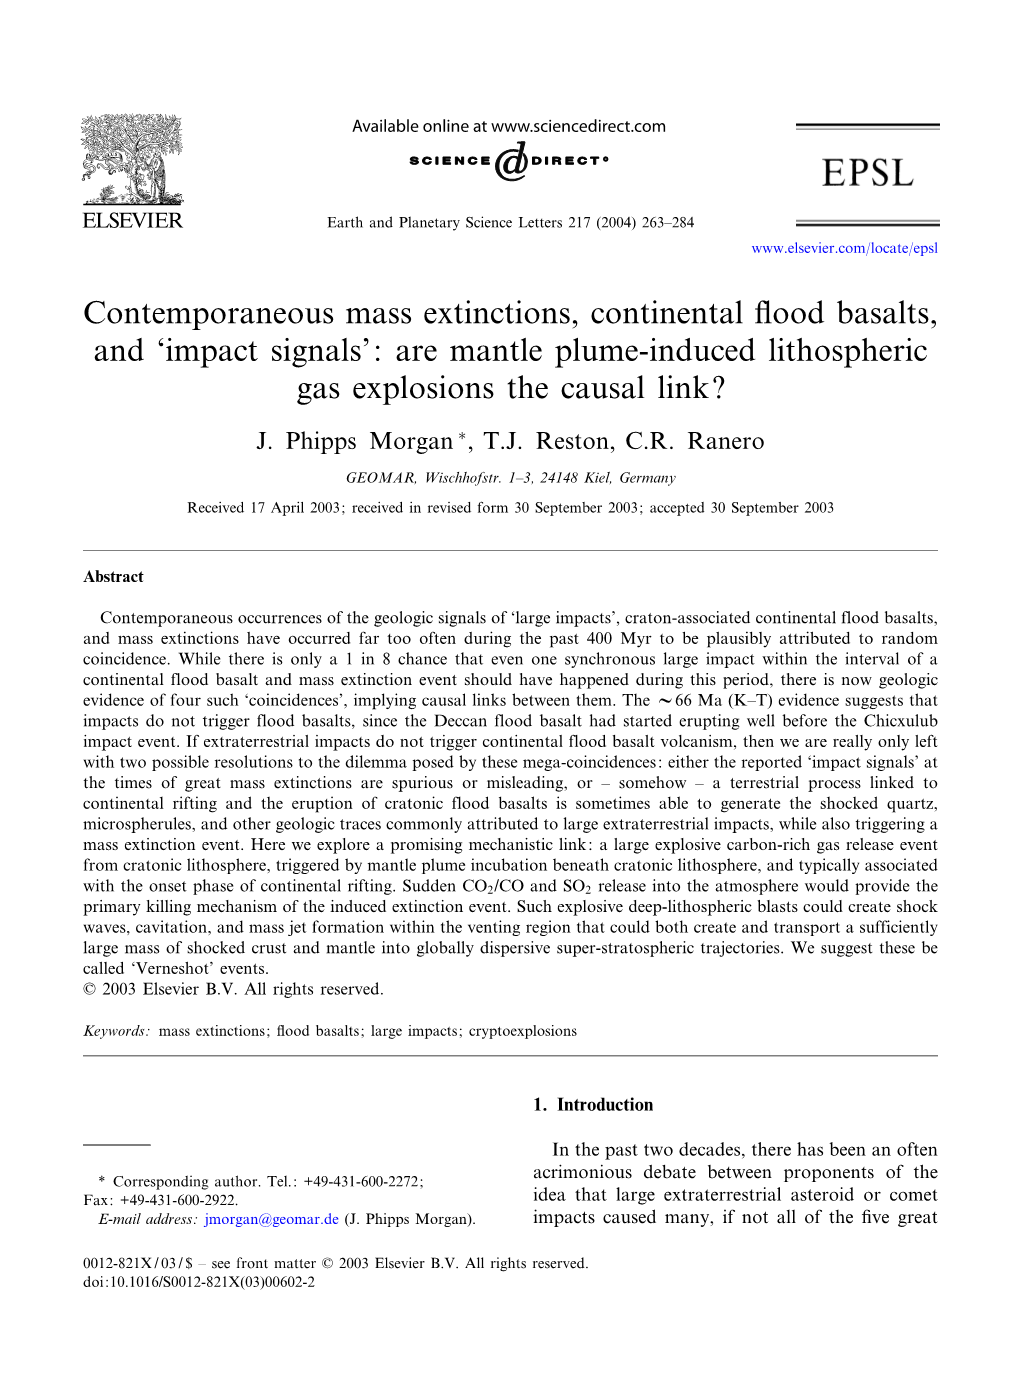 Contemporaneous Mass Extinctions, Continental £Ood Basalts, and ‘Impact Signals’: Are Mantle Plume-Induced Lithospheric Gas Explosions the Causal Link?